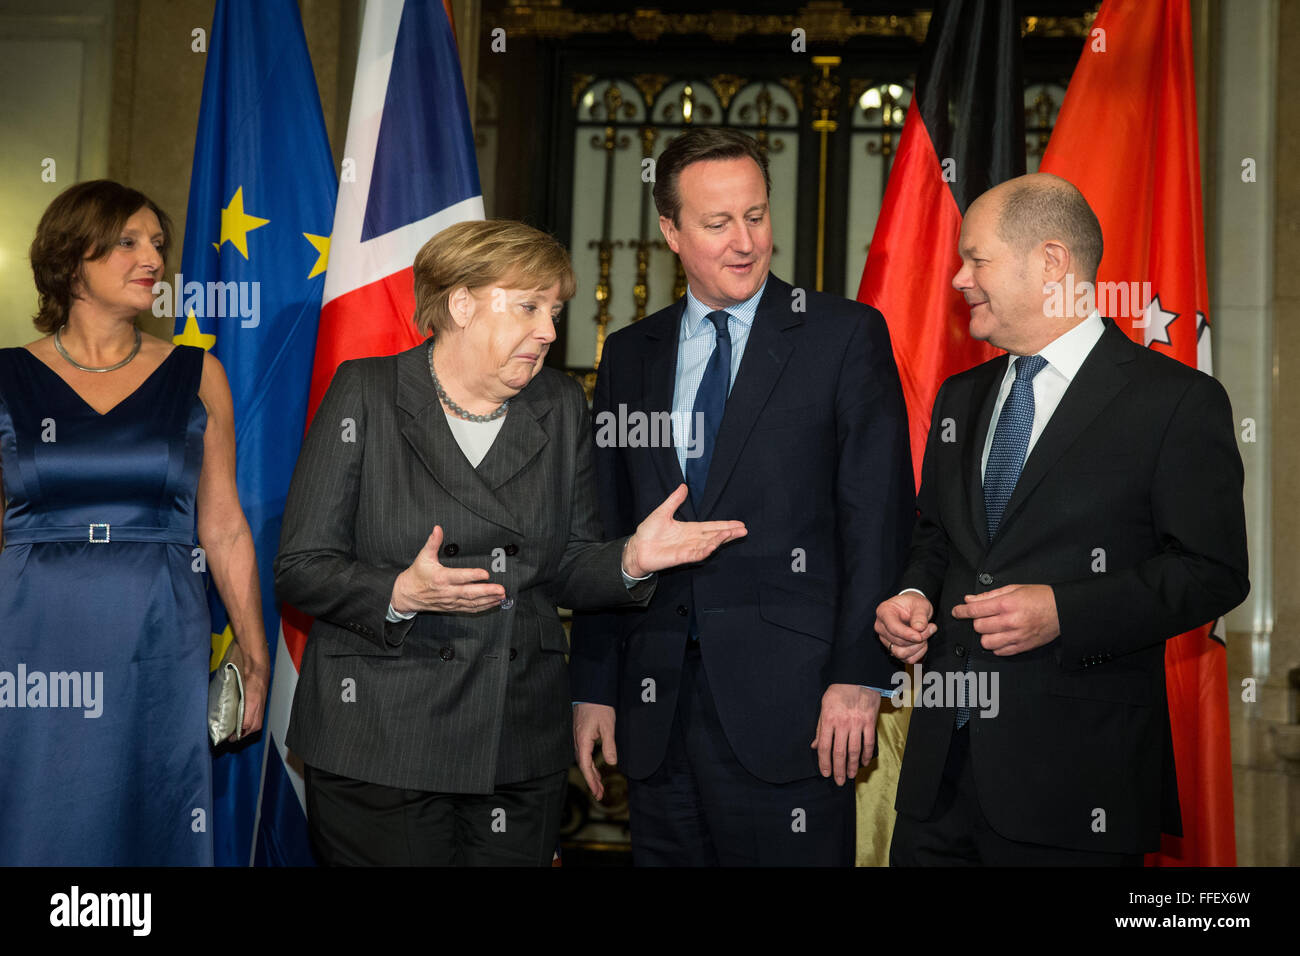 Hamburg, Germany. 12th Feb, 2016. Chancellor Angela Merkel (CDU, 2nd l), British Premier David Cameron (2nd r), Mayor of Hamburg Olaf Scholz (SPD, r) and his wife Britta Ernst (l) together at the city hall of Hamburg, Germany, 12 February 2016. Merkel and Cameron are guests of honour at the oldest feast in the world. Since 1356, the governance of the Hanse city invites to the Matthiae dinner. PHOTO: CHRISTIAN CHARISIUS/dpa/Alamy Live News Stock Photo